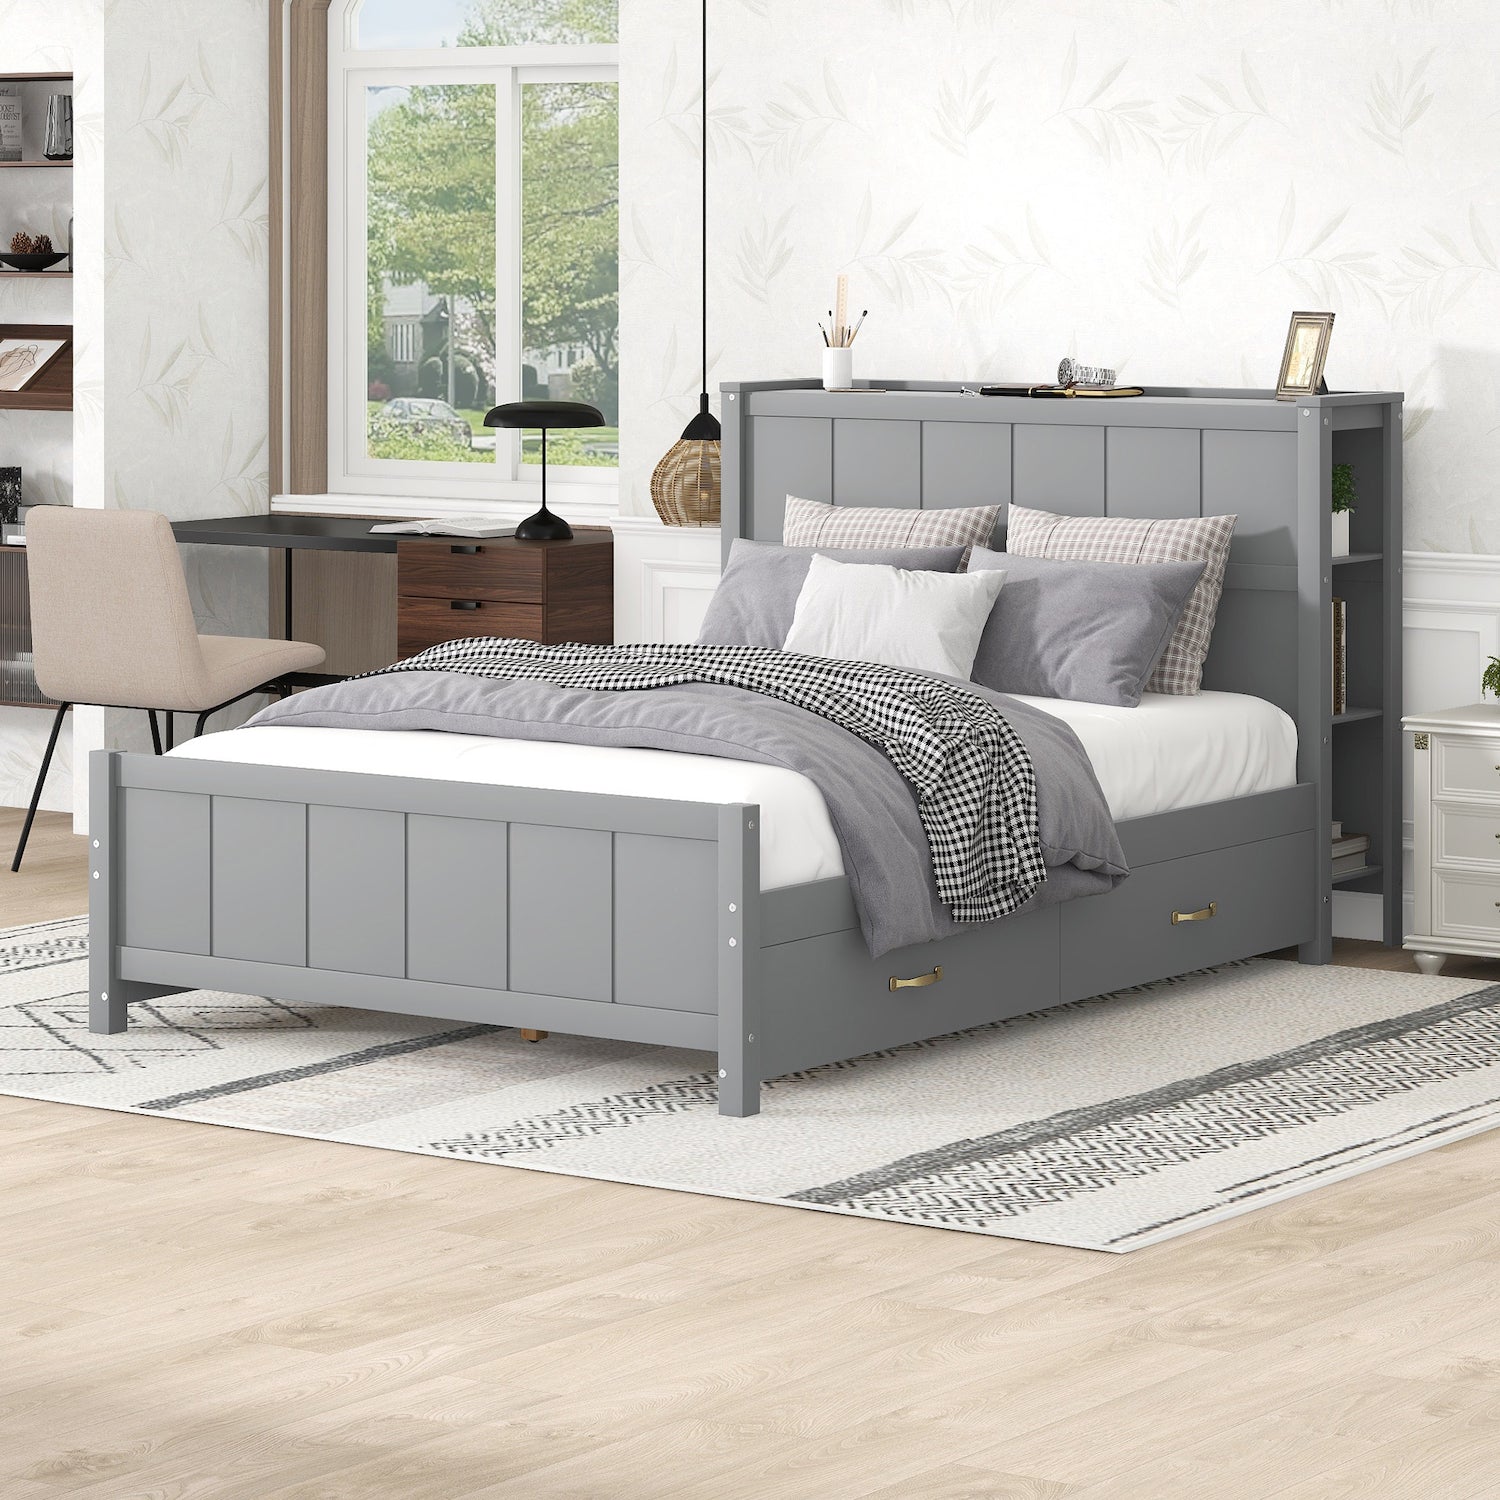 WM Store Full Size Platform Bed with Shelves & Storage Trundle - Gray